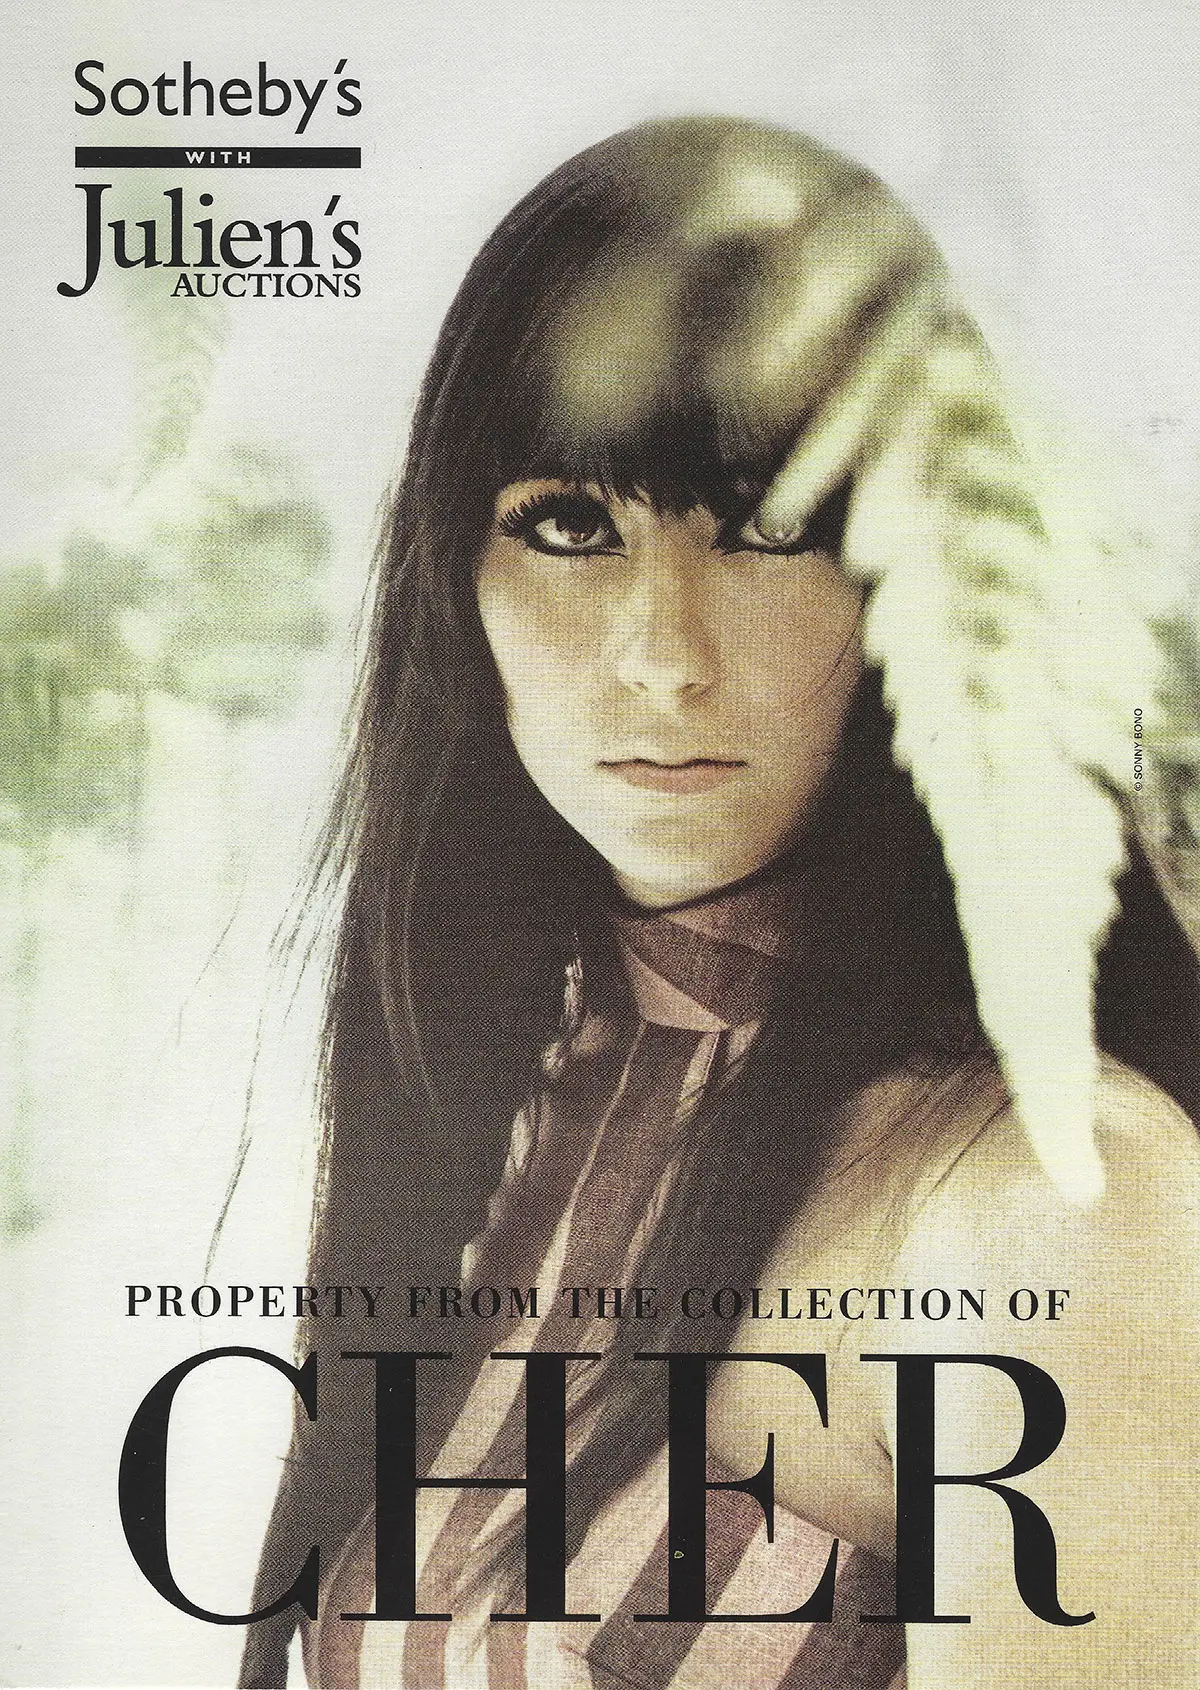 October 3-4, 2006 Sotheby’s & Julien’s Auction Promo For Property From The Collection Of Cher